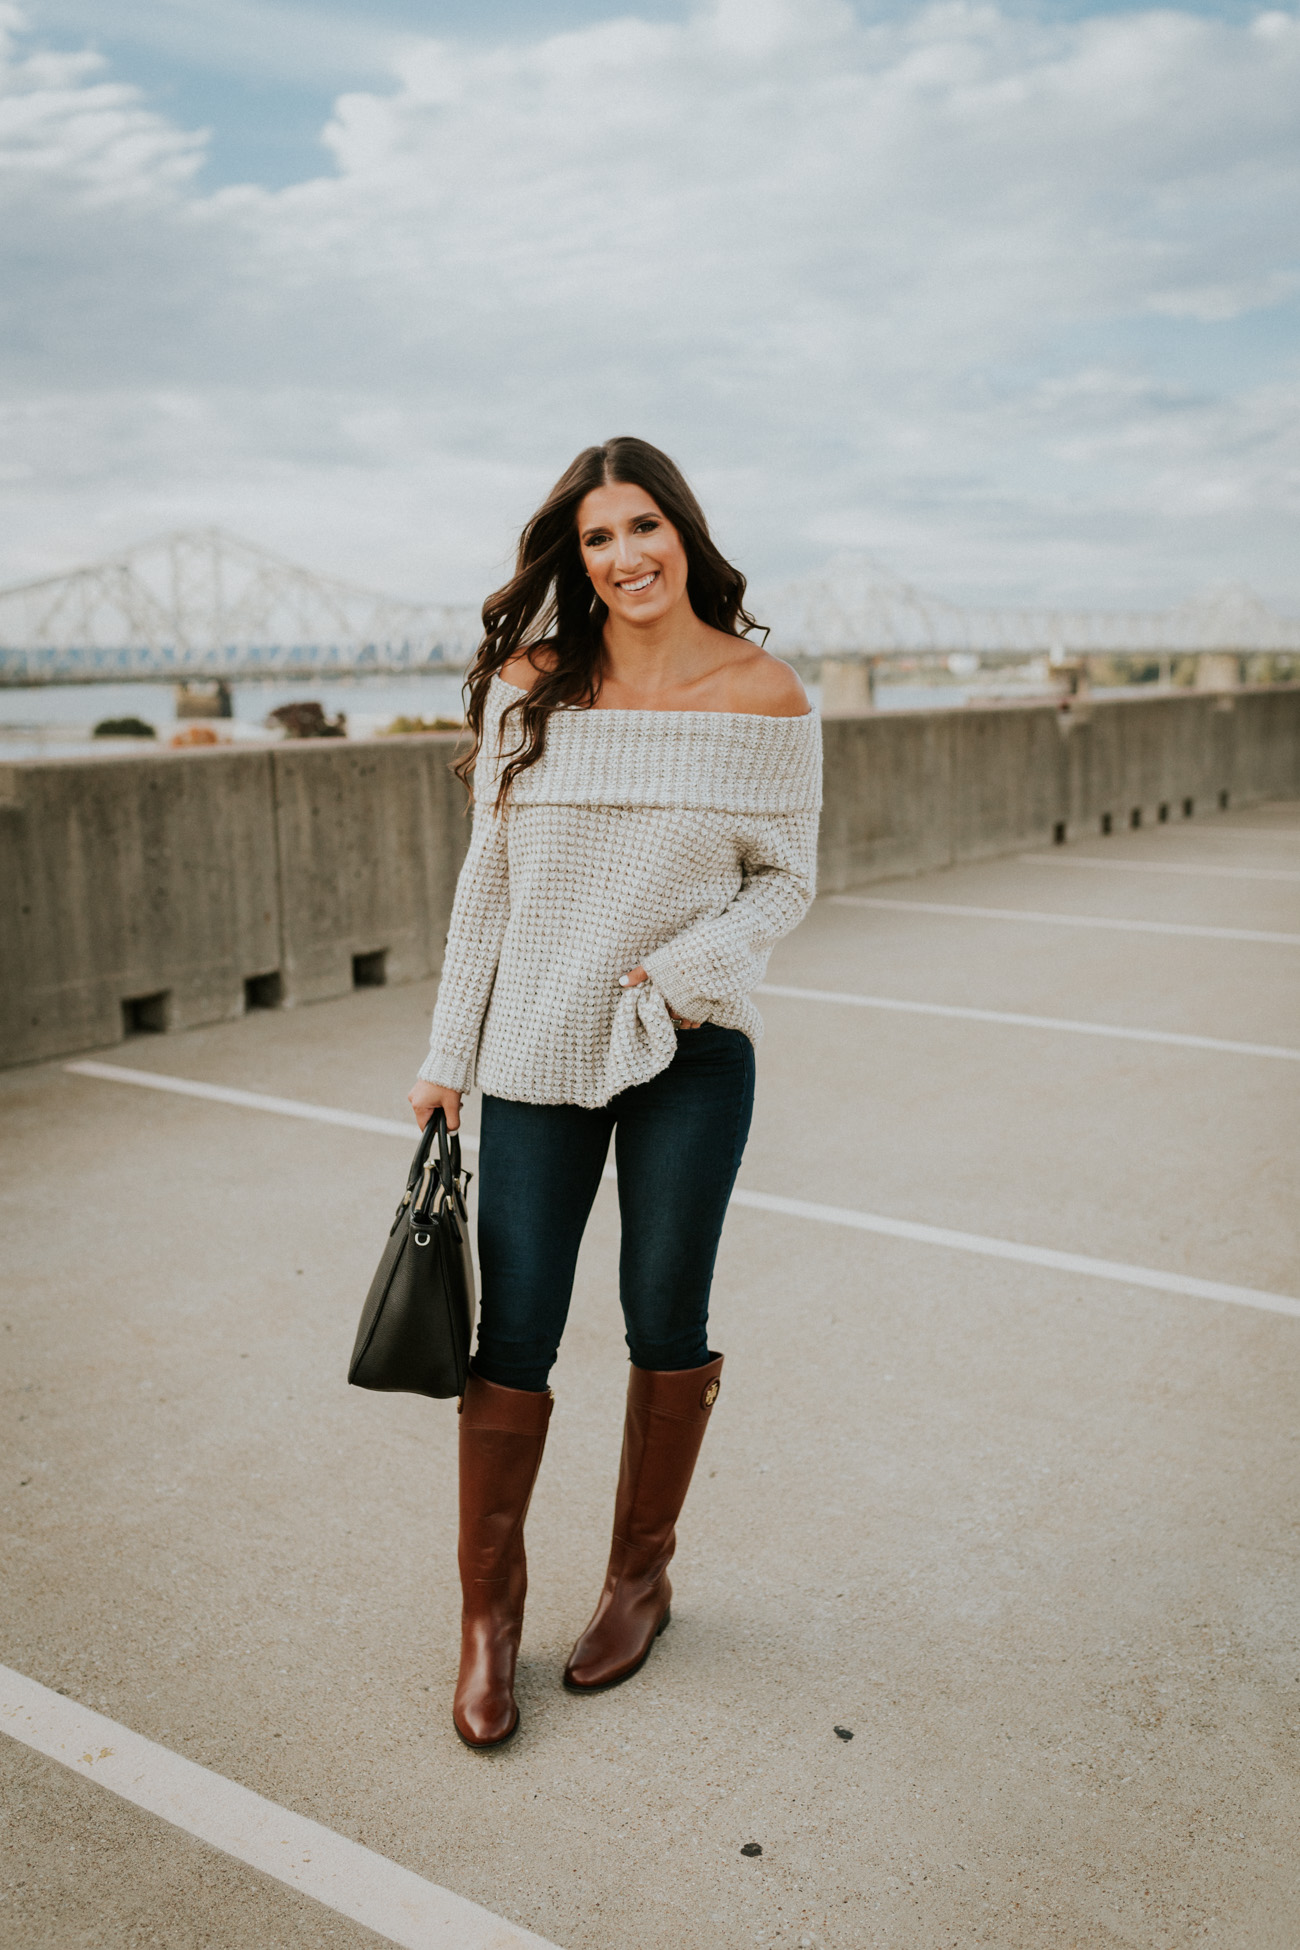 fall riding boots, off the shoulder sweater, cozy sweater, cozy fall sweaters, bb dakota sweaters, tory burch riding boots, tory burch boots, tory burch satchel, fall style, buffalo plaid shirt, fall fashion, fall outfit ideas, couple outfits, fall couples outfit, fall couple outfits // grace wainwright a southern drawl